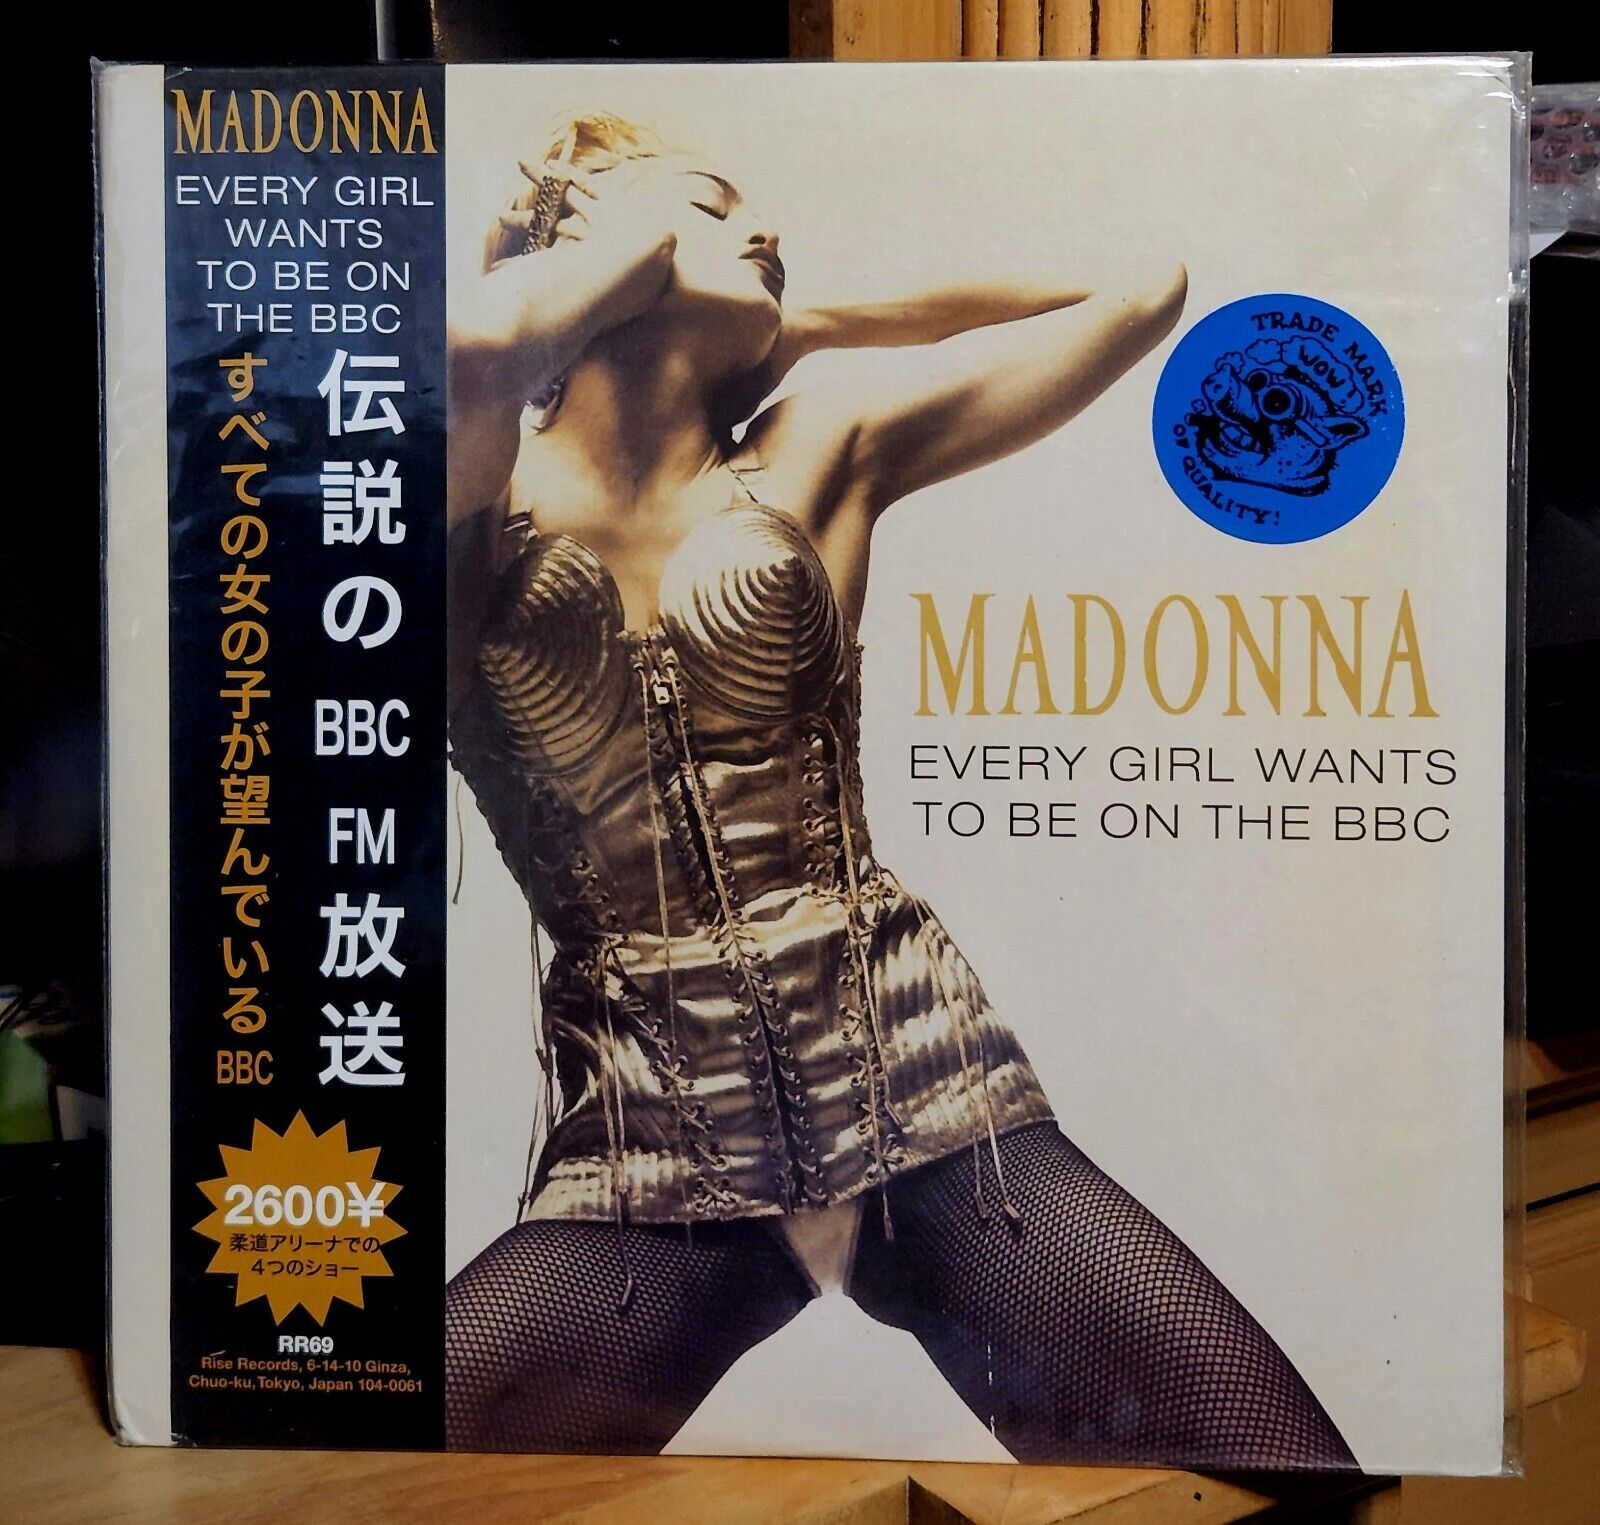 Ultra Rare! Japan Madonna Every Girl Wants To Be On The Bbc 12" Blue Vinyl 2-lp